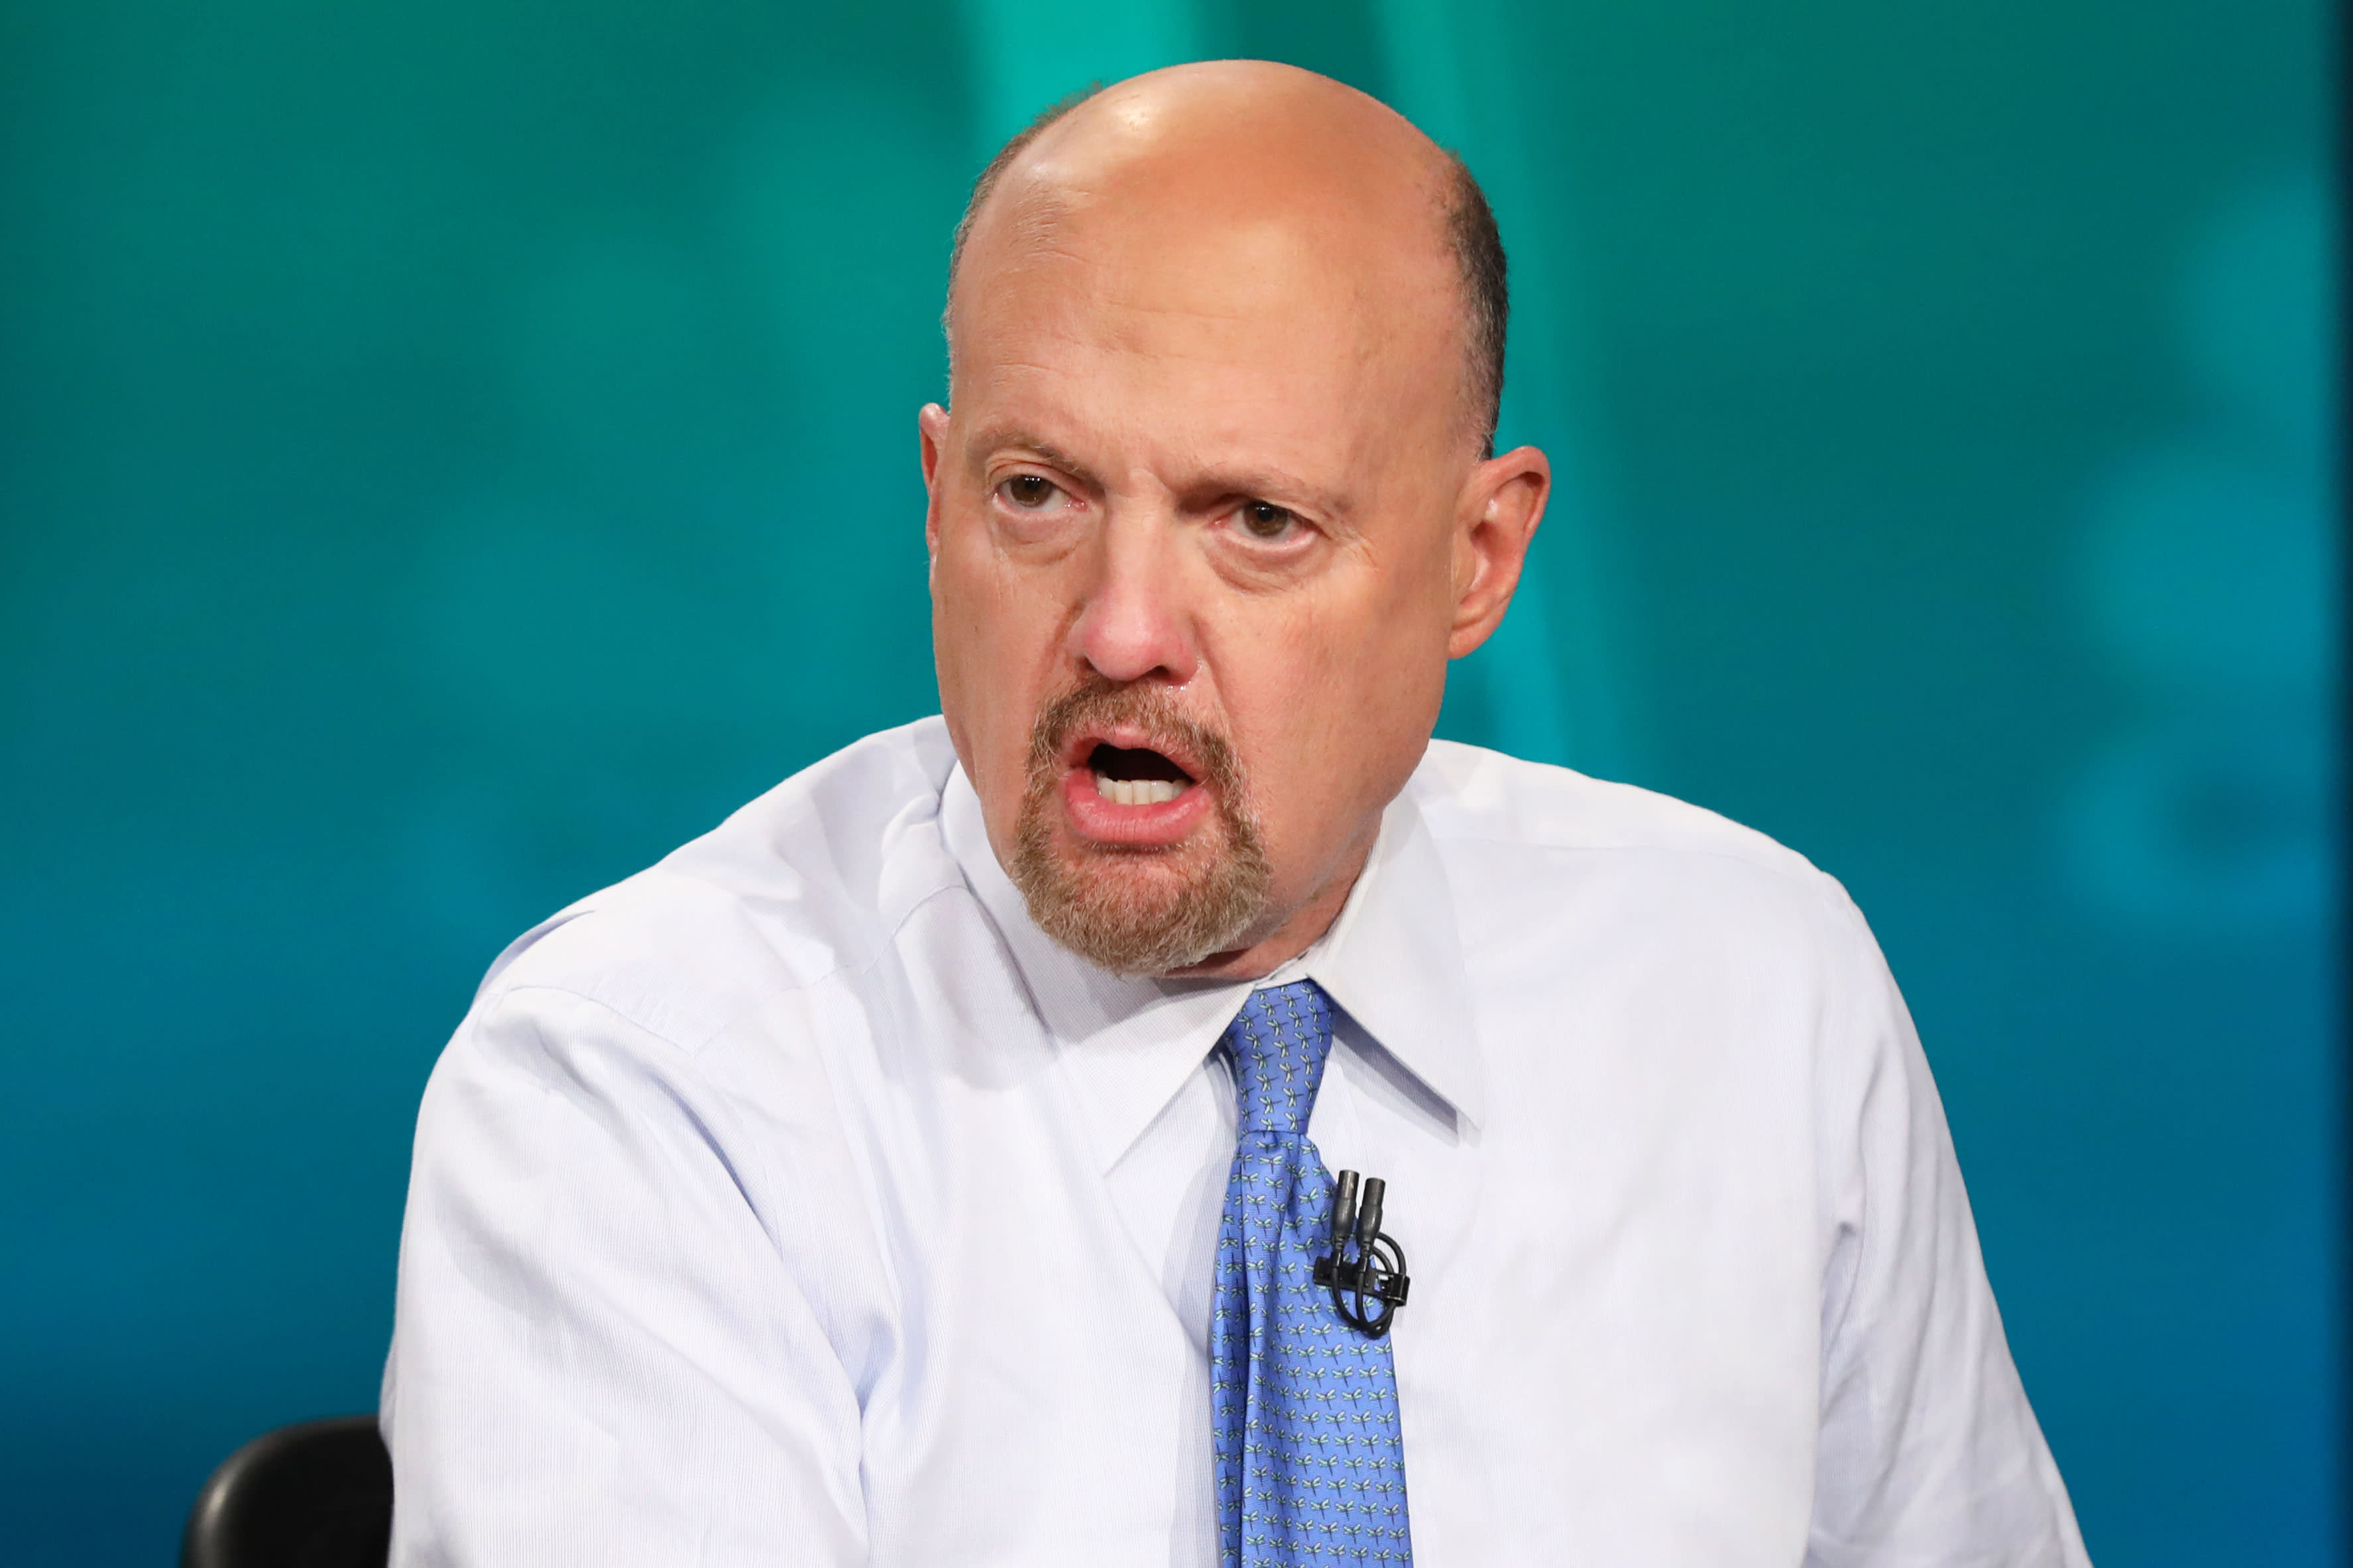 Cramer says selling not done for tech stocks trading at high multiples to sales: ‘Those have had it’ – CNBC